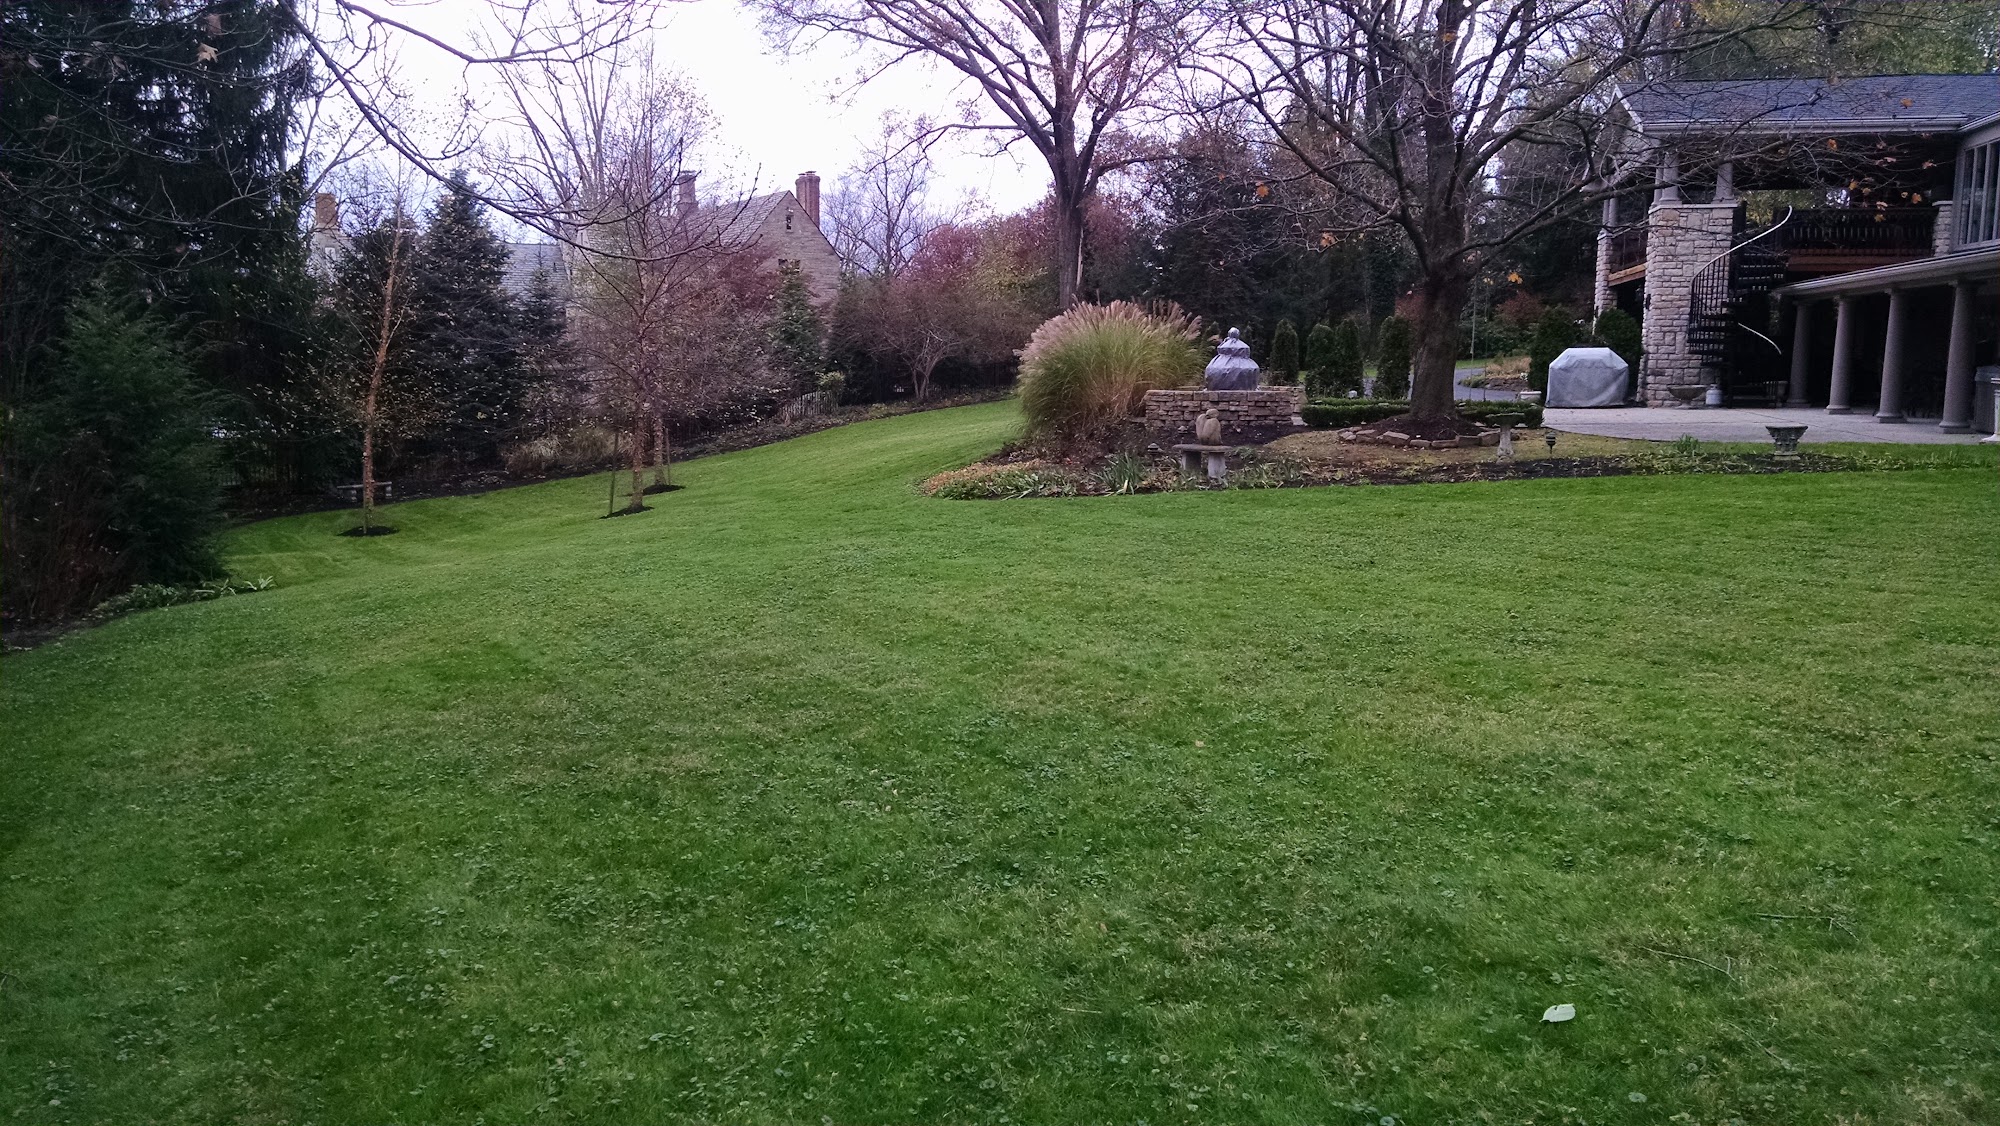 Nurture the Nature Lawns and Landscapes 427 Pittsburgh St, Springdale Pennsylvania 15144